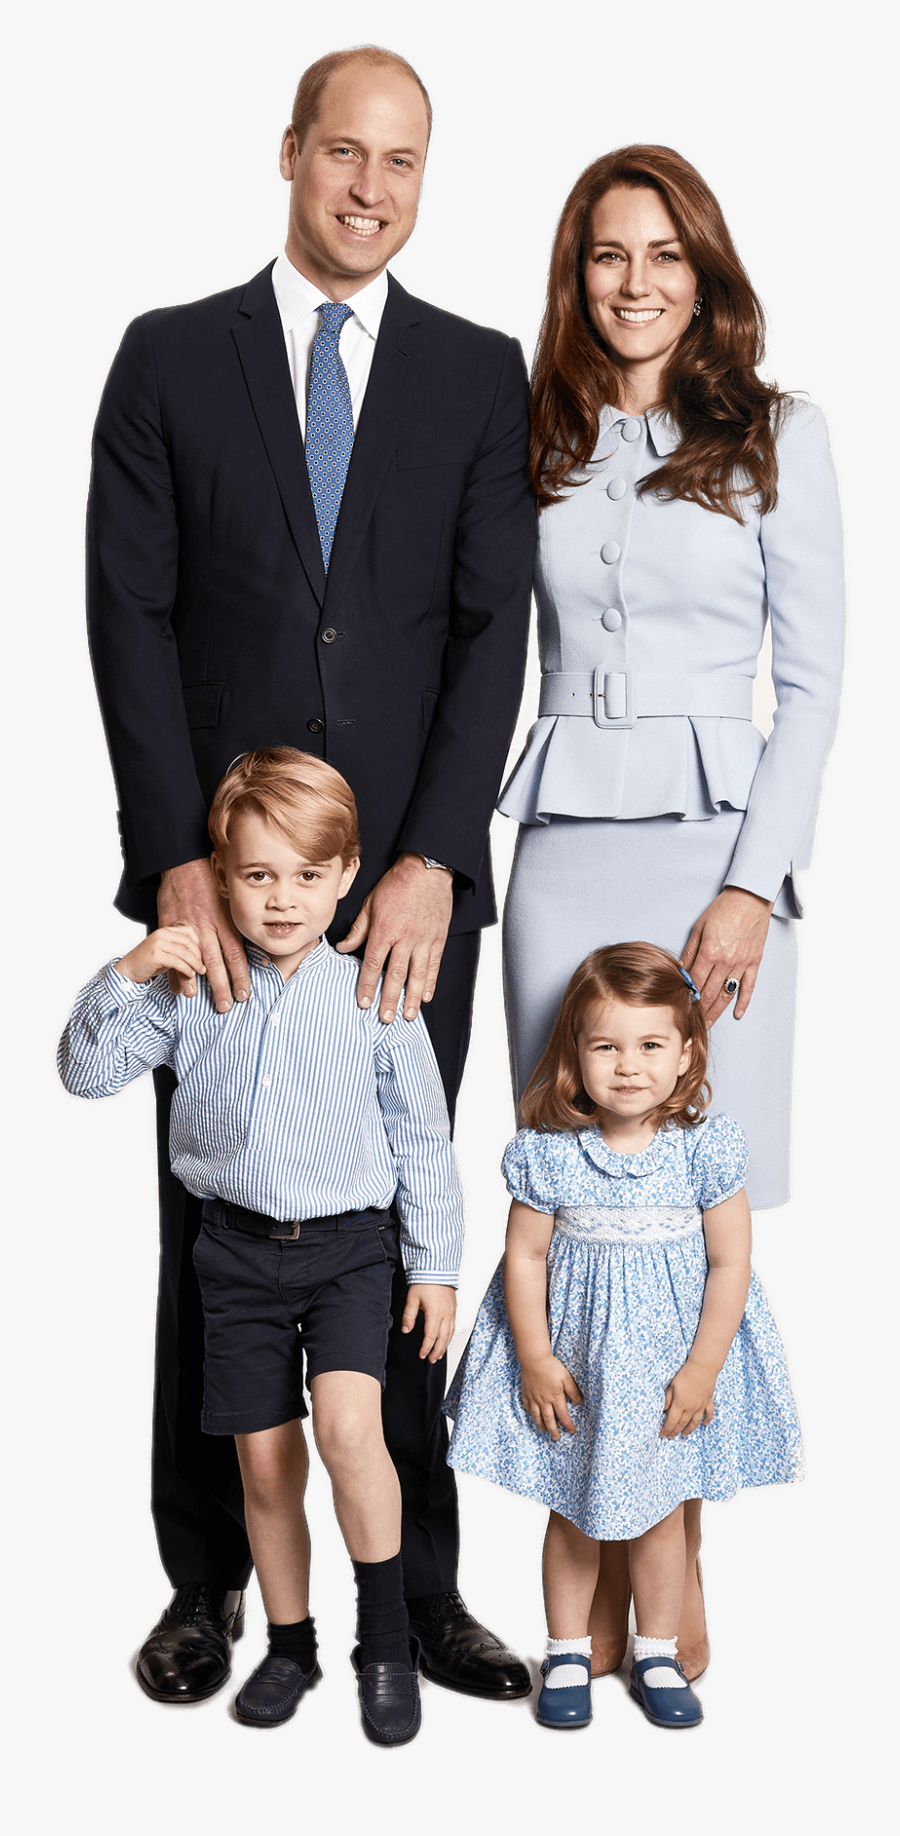 Prince William And Catherine Family Photo - Royal Family 2017 Christmas, Transparent Clipart